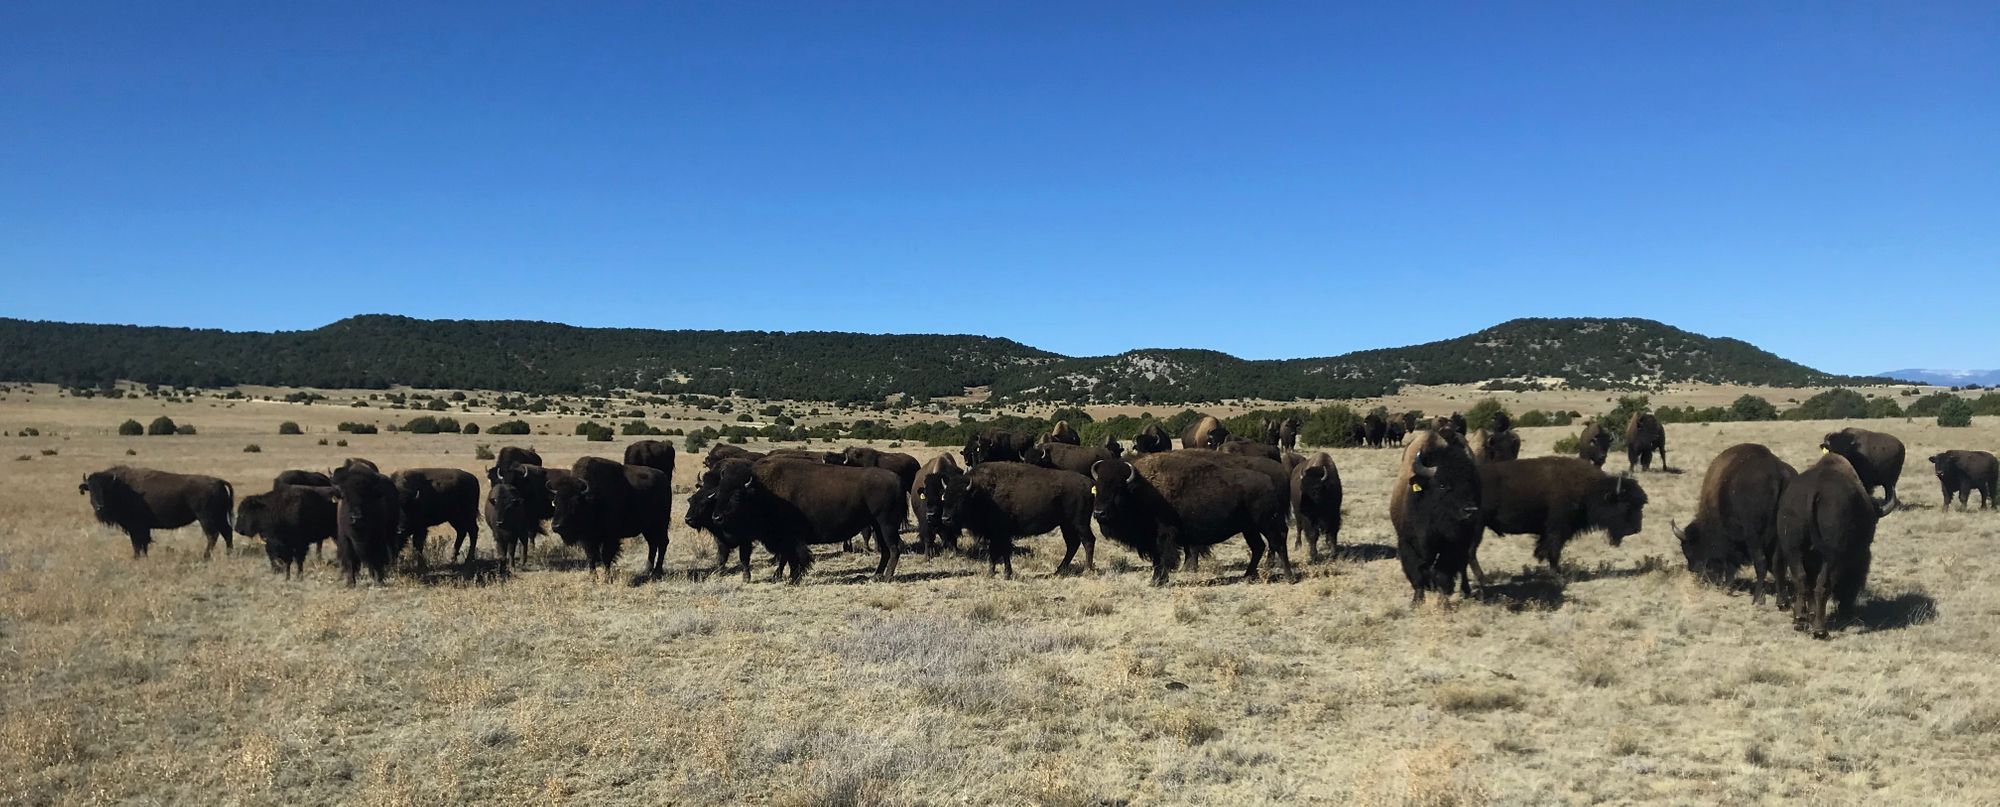 American Bison Society conference